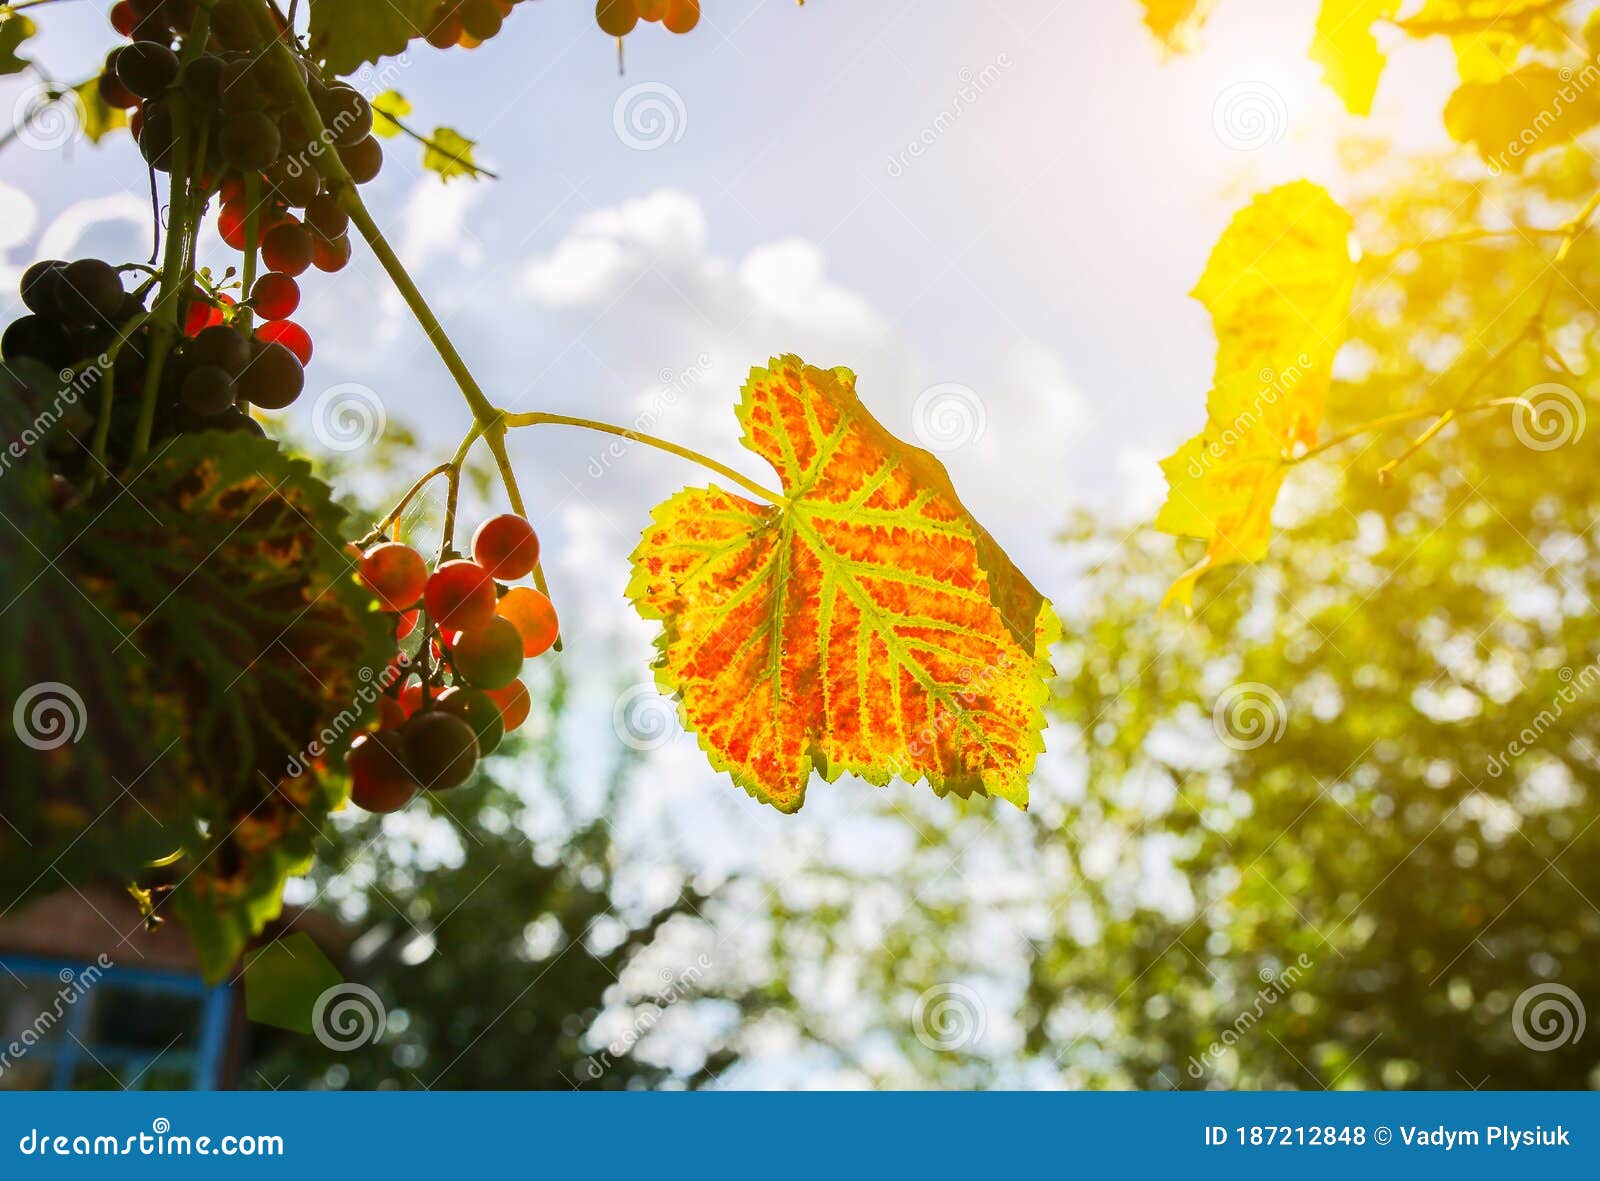 yellow grapes leaves in the sun beams.  autumn day on farm yard. harvest time. nature photo. rupe fruit